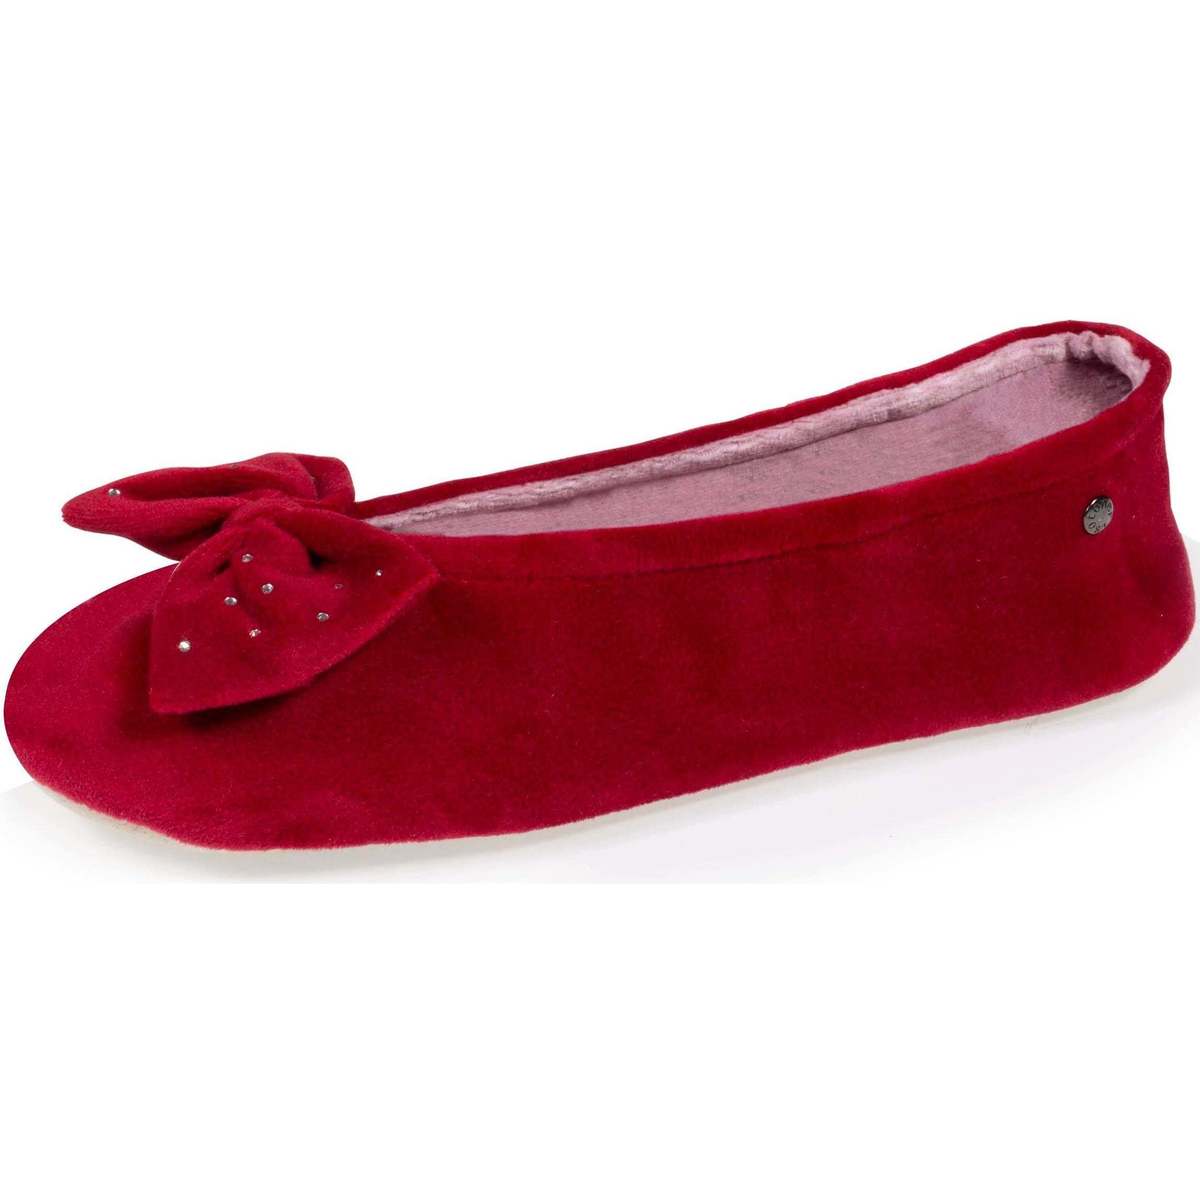 Chaussures Femme Chaussons Isotoner Chaussons ballerines semelle en cuir Rouge